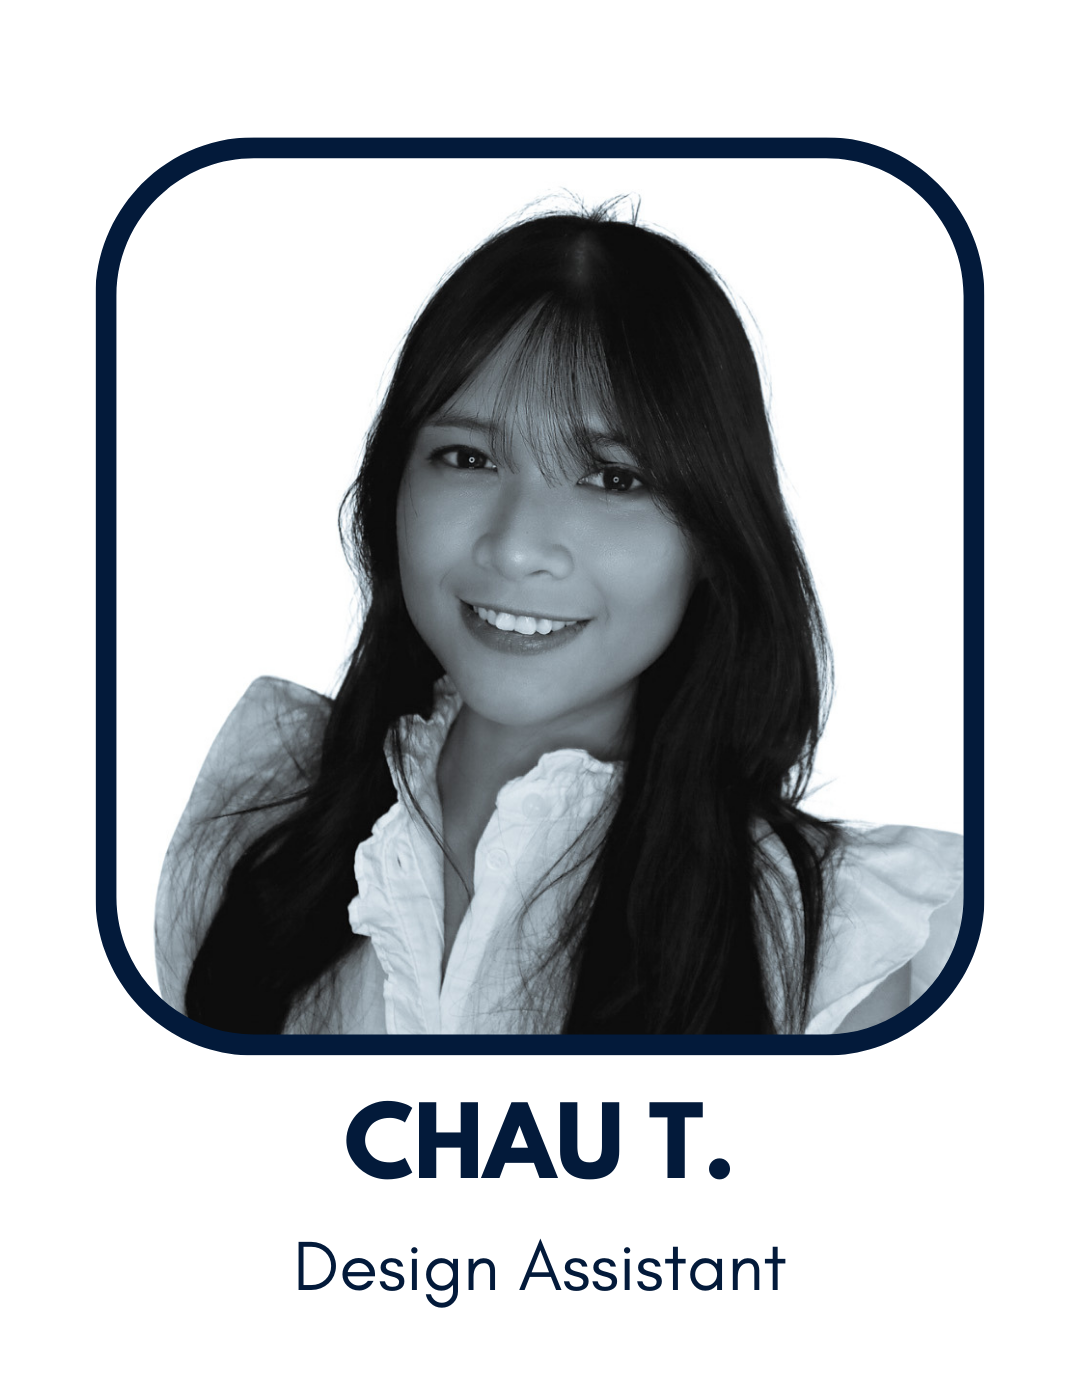 Chau T., Design Assistant at 4Dbiz. Specialties include drafting support for interior designers, rendering support for interior designers, and more.